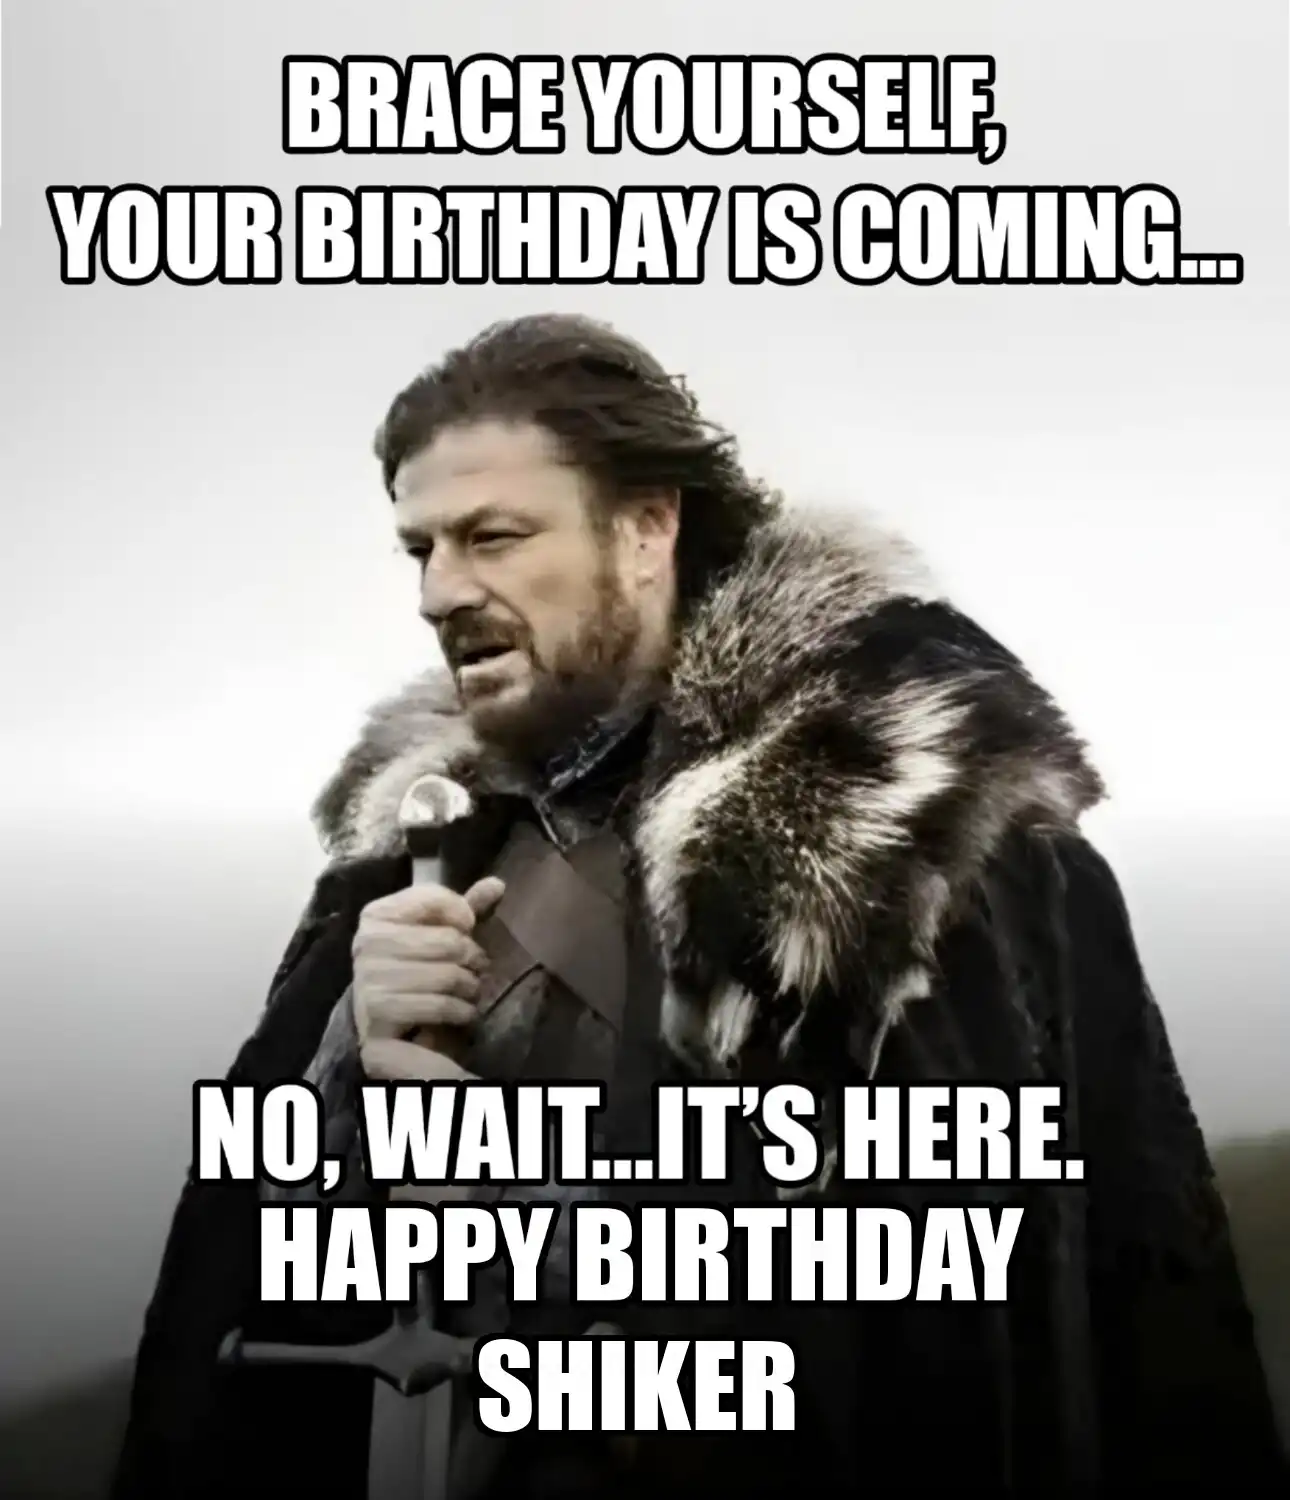 Happy Birthday Shiker Brace Yourself Your Birthday Is Coming Meme